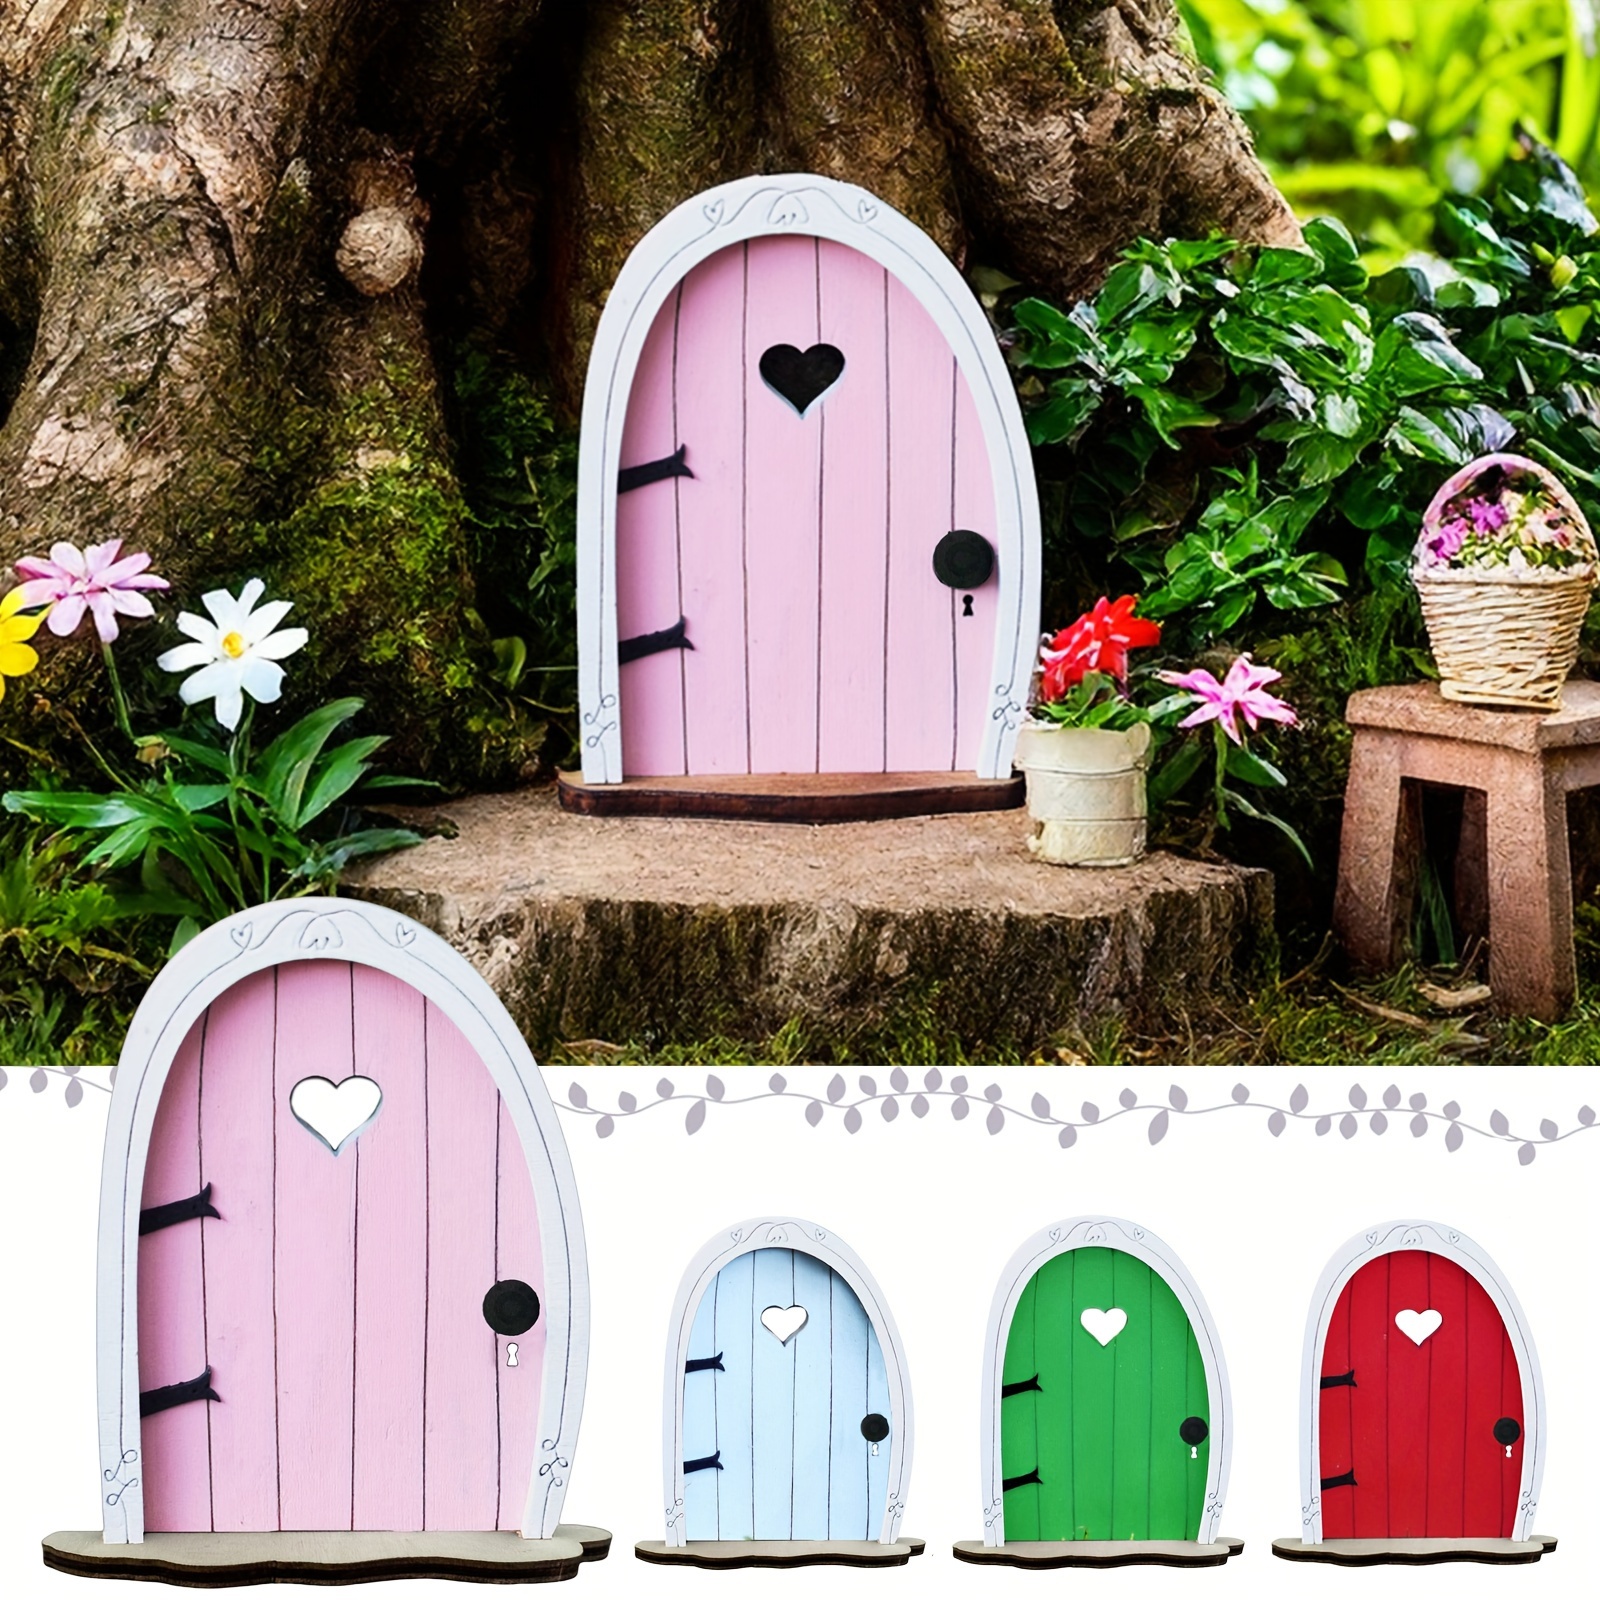 

Enchanting Fairy Door Decoration - 1pc Colorful Elf Wooden Ornament For Garden & Home, Indoor Fairy Tale Tree Craft, Perfect For Micro Landscape Ambiance (1cm Thick)